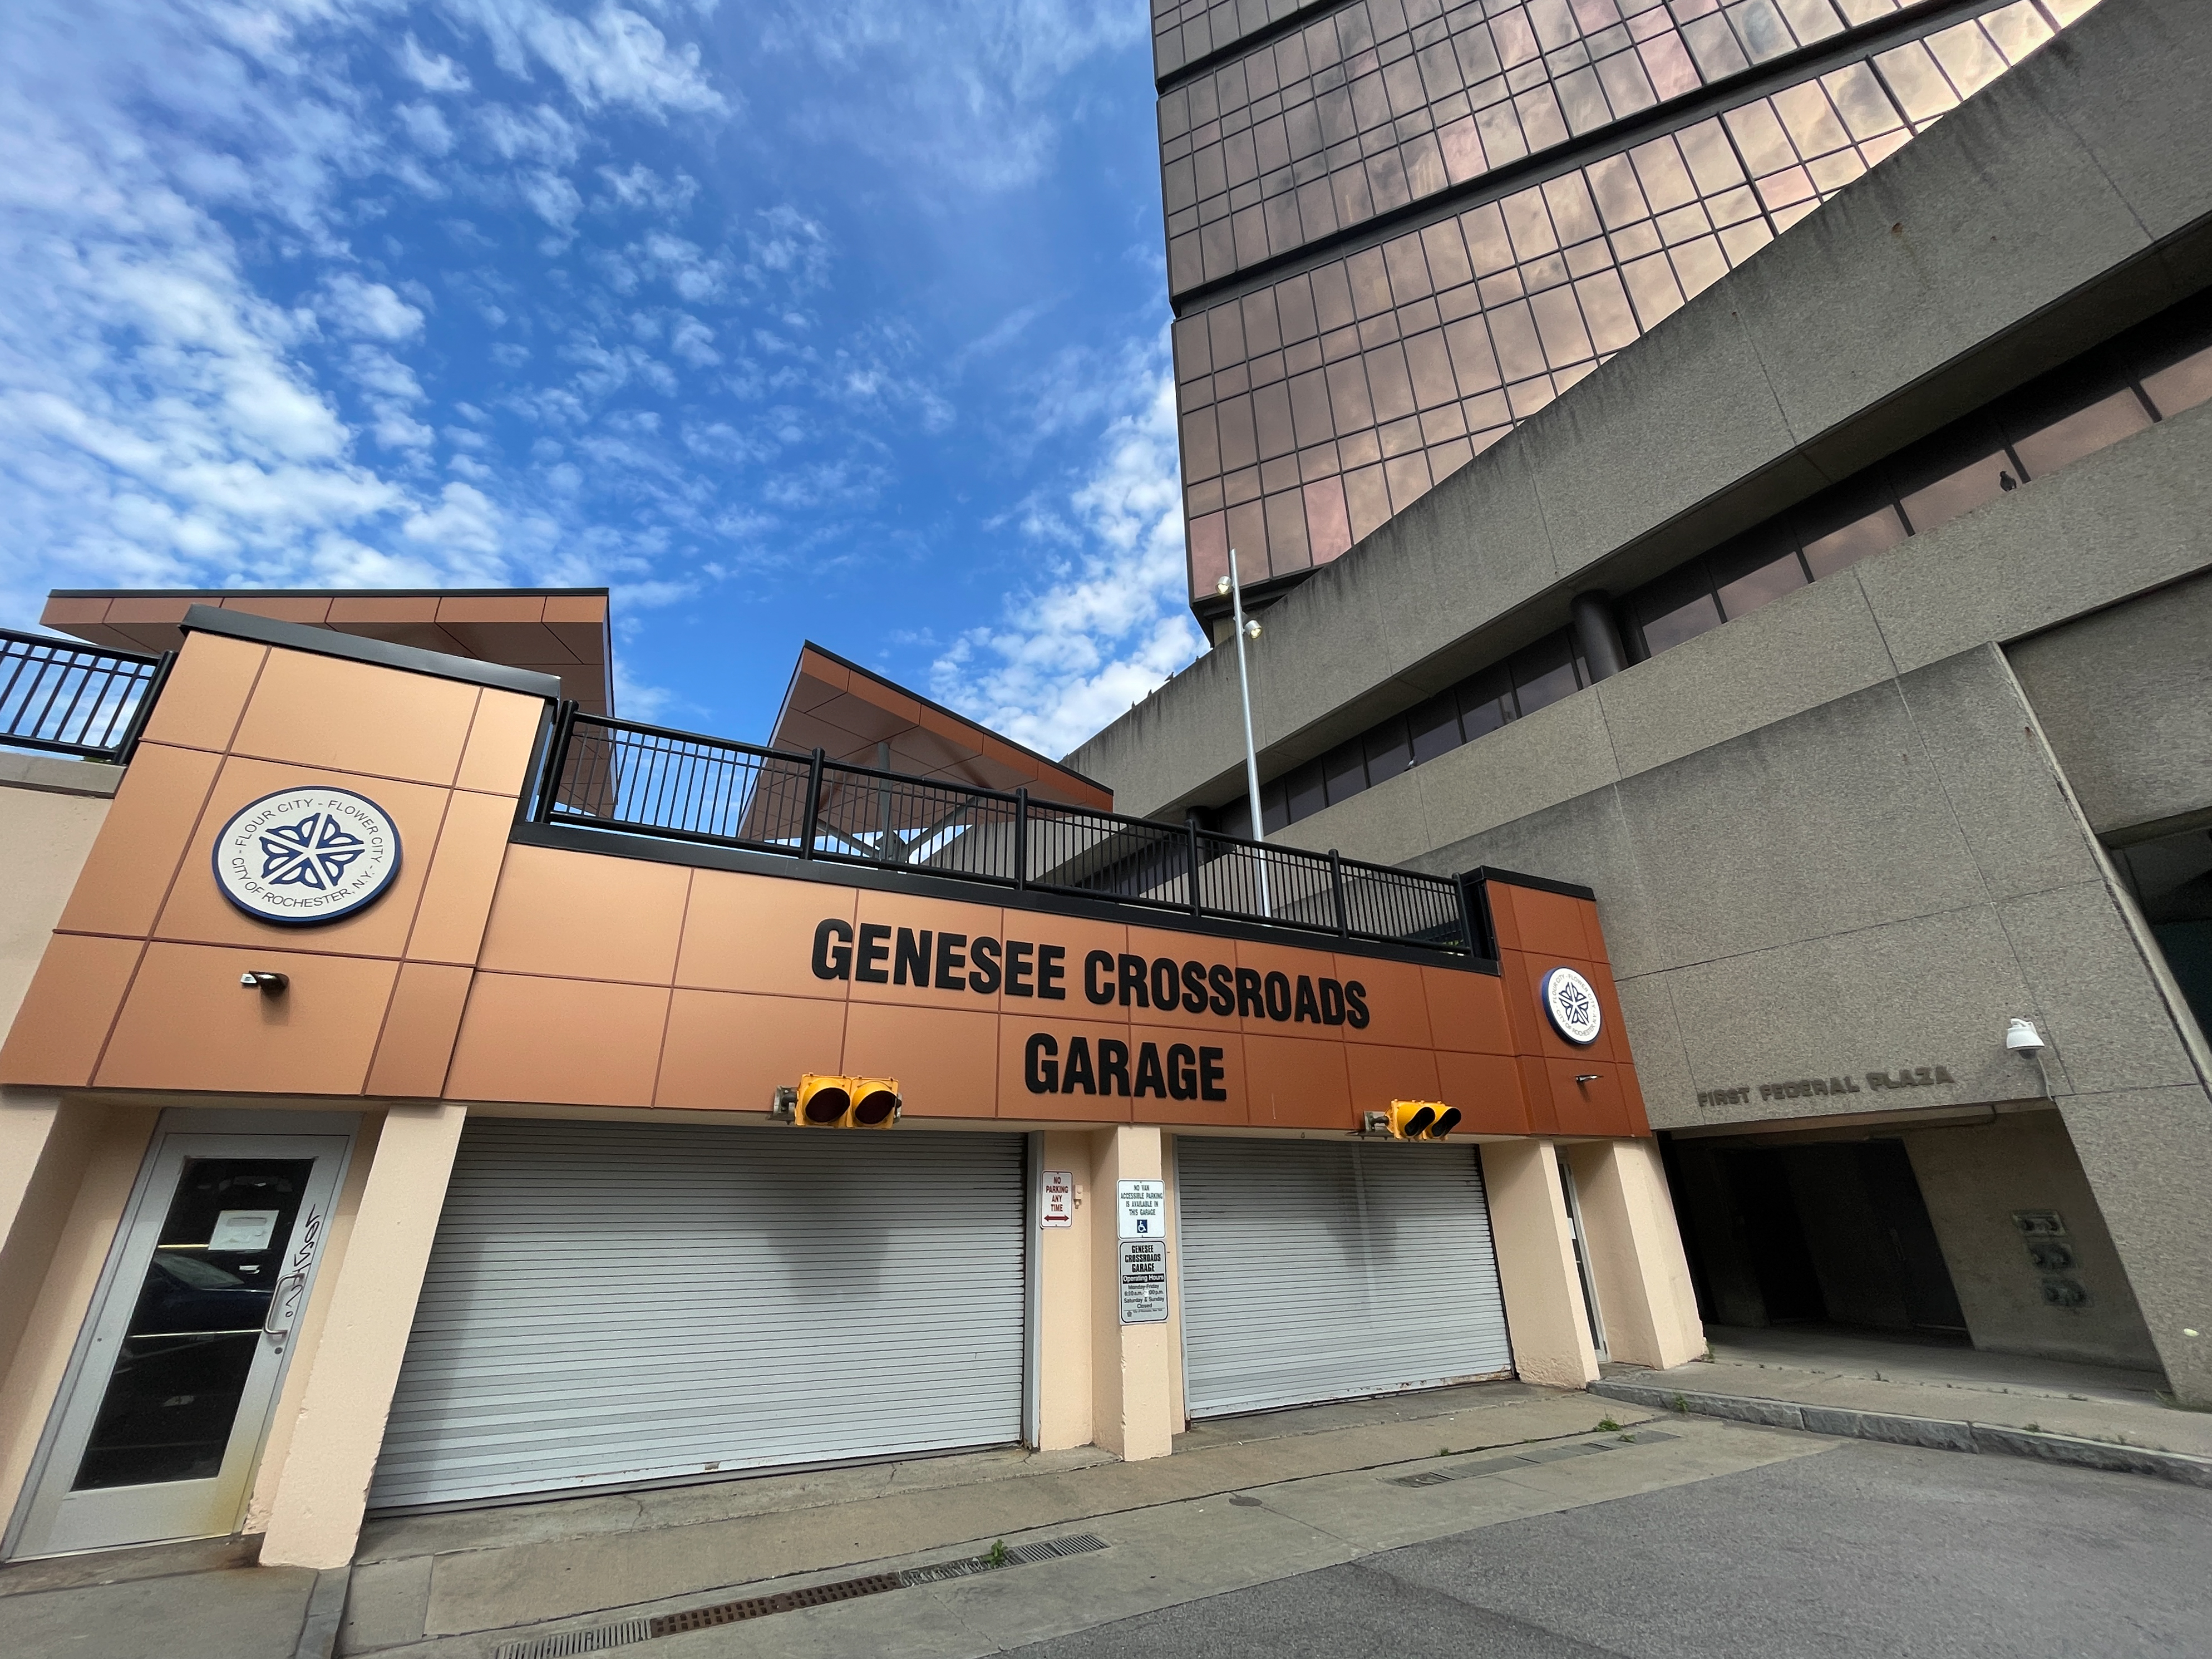 Photo of Genesee Crossroads Garage in downtown Rochester.